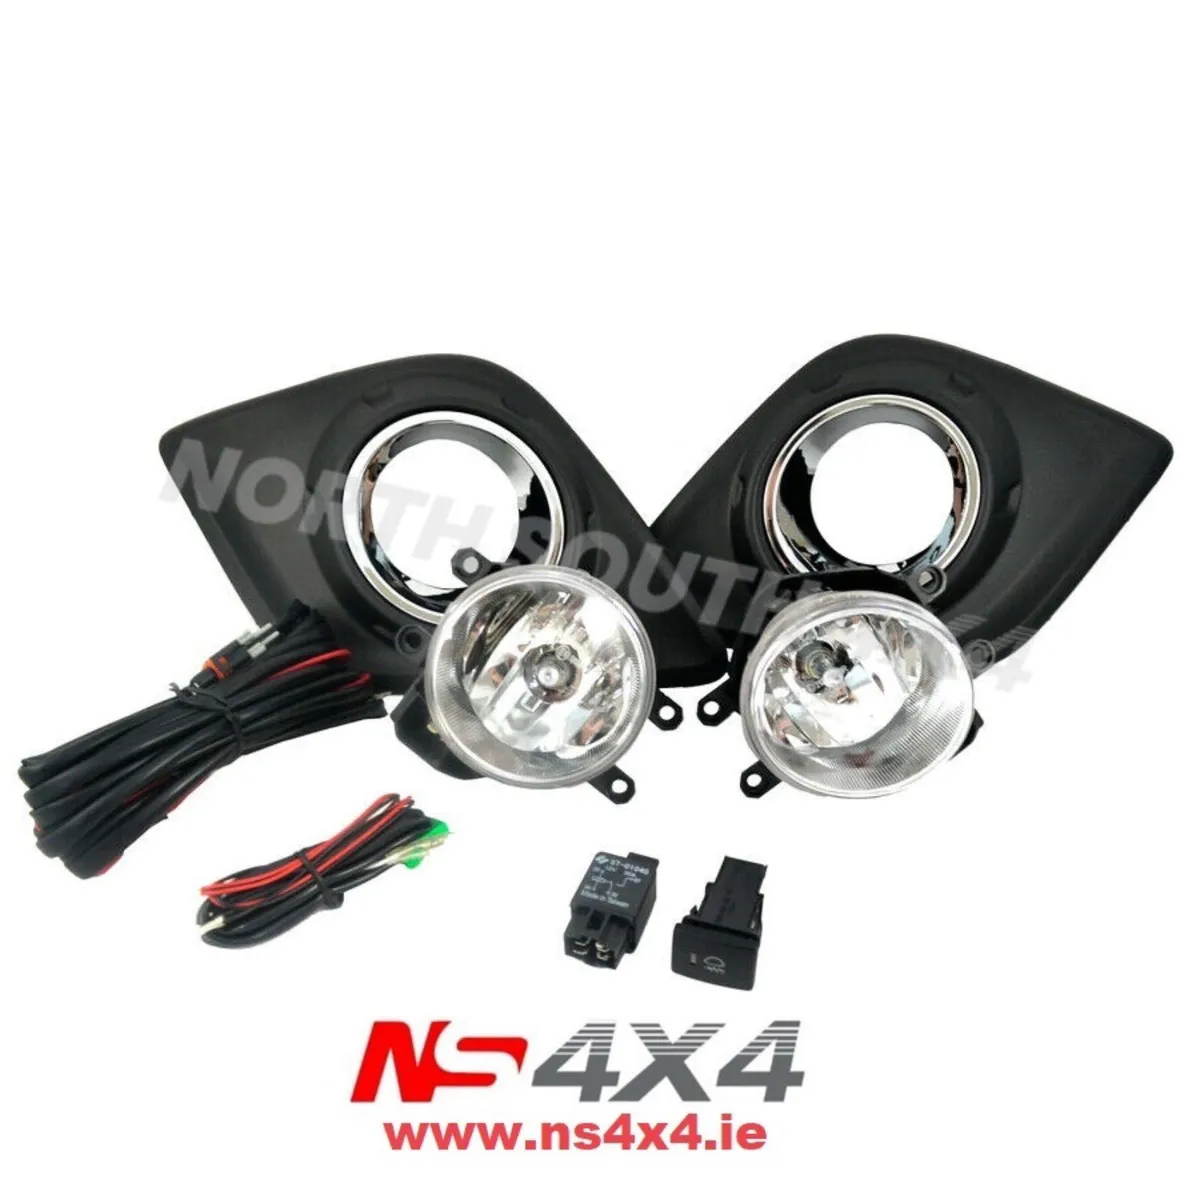 Toyota Hilux fog lamp kits// all spares - Image 1